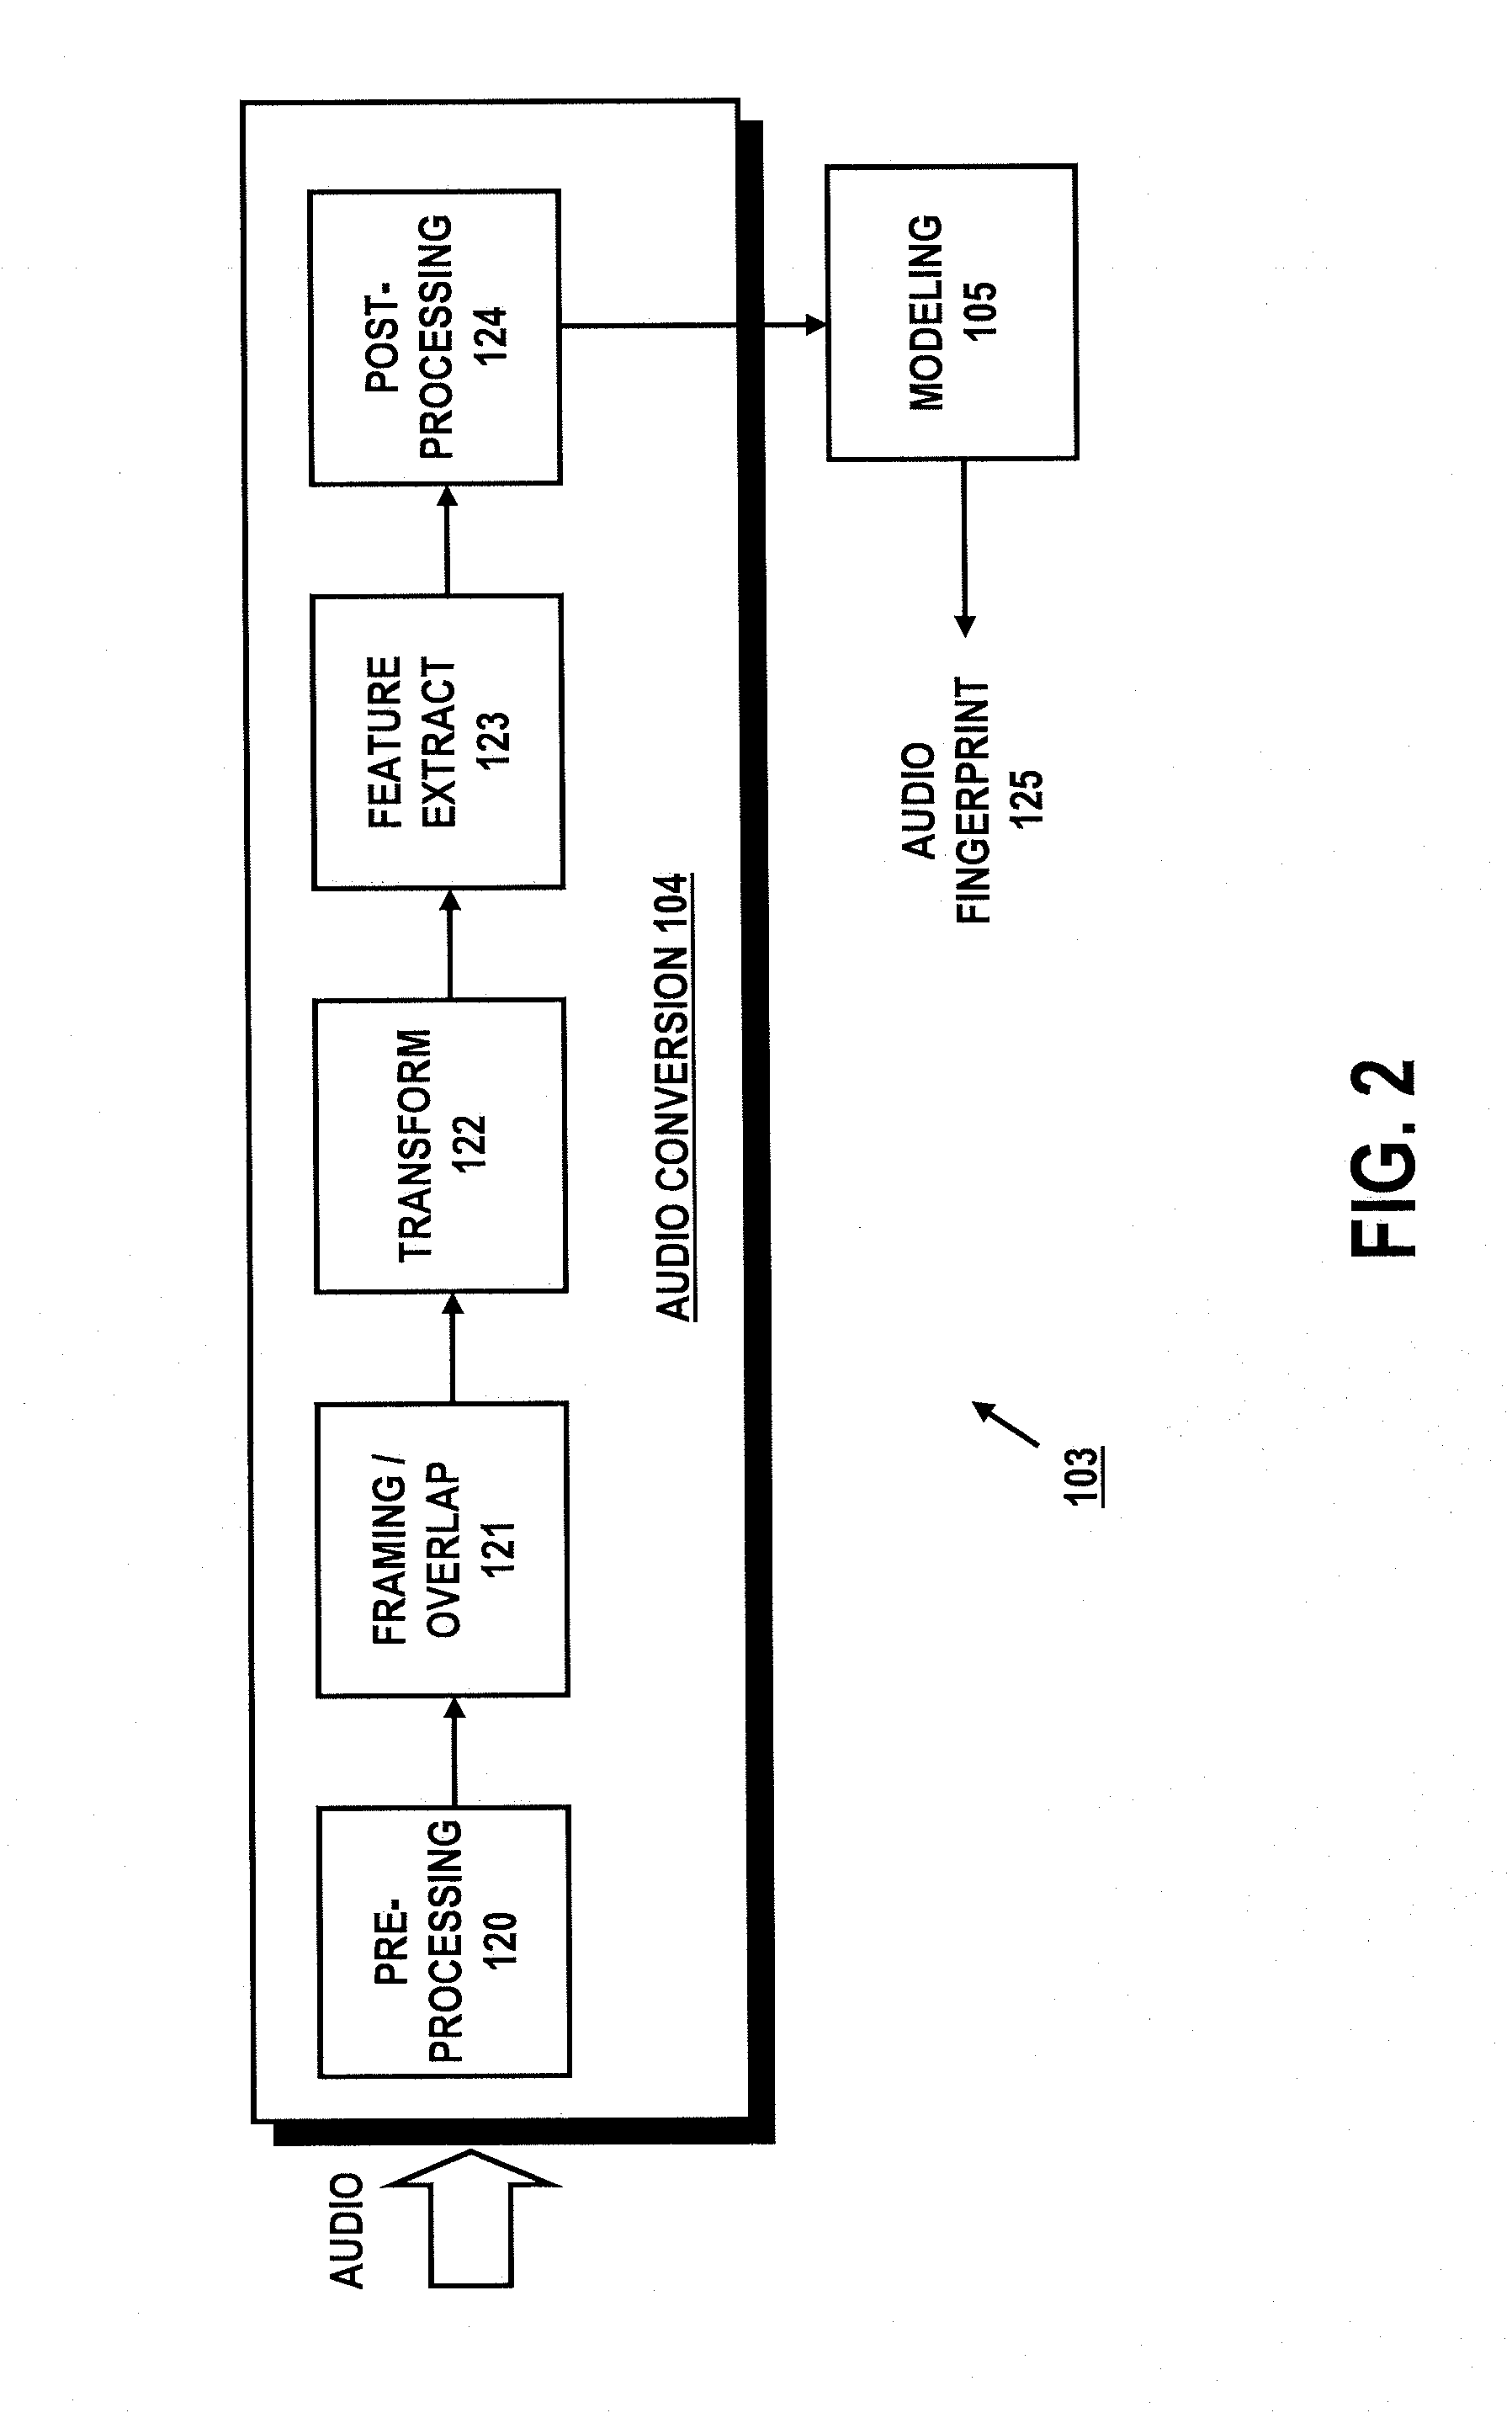 Distributed audience measurement systems and methods